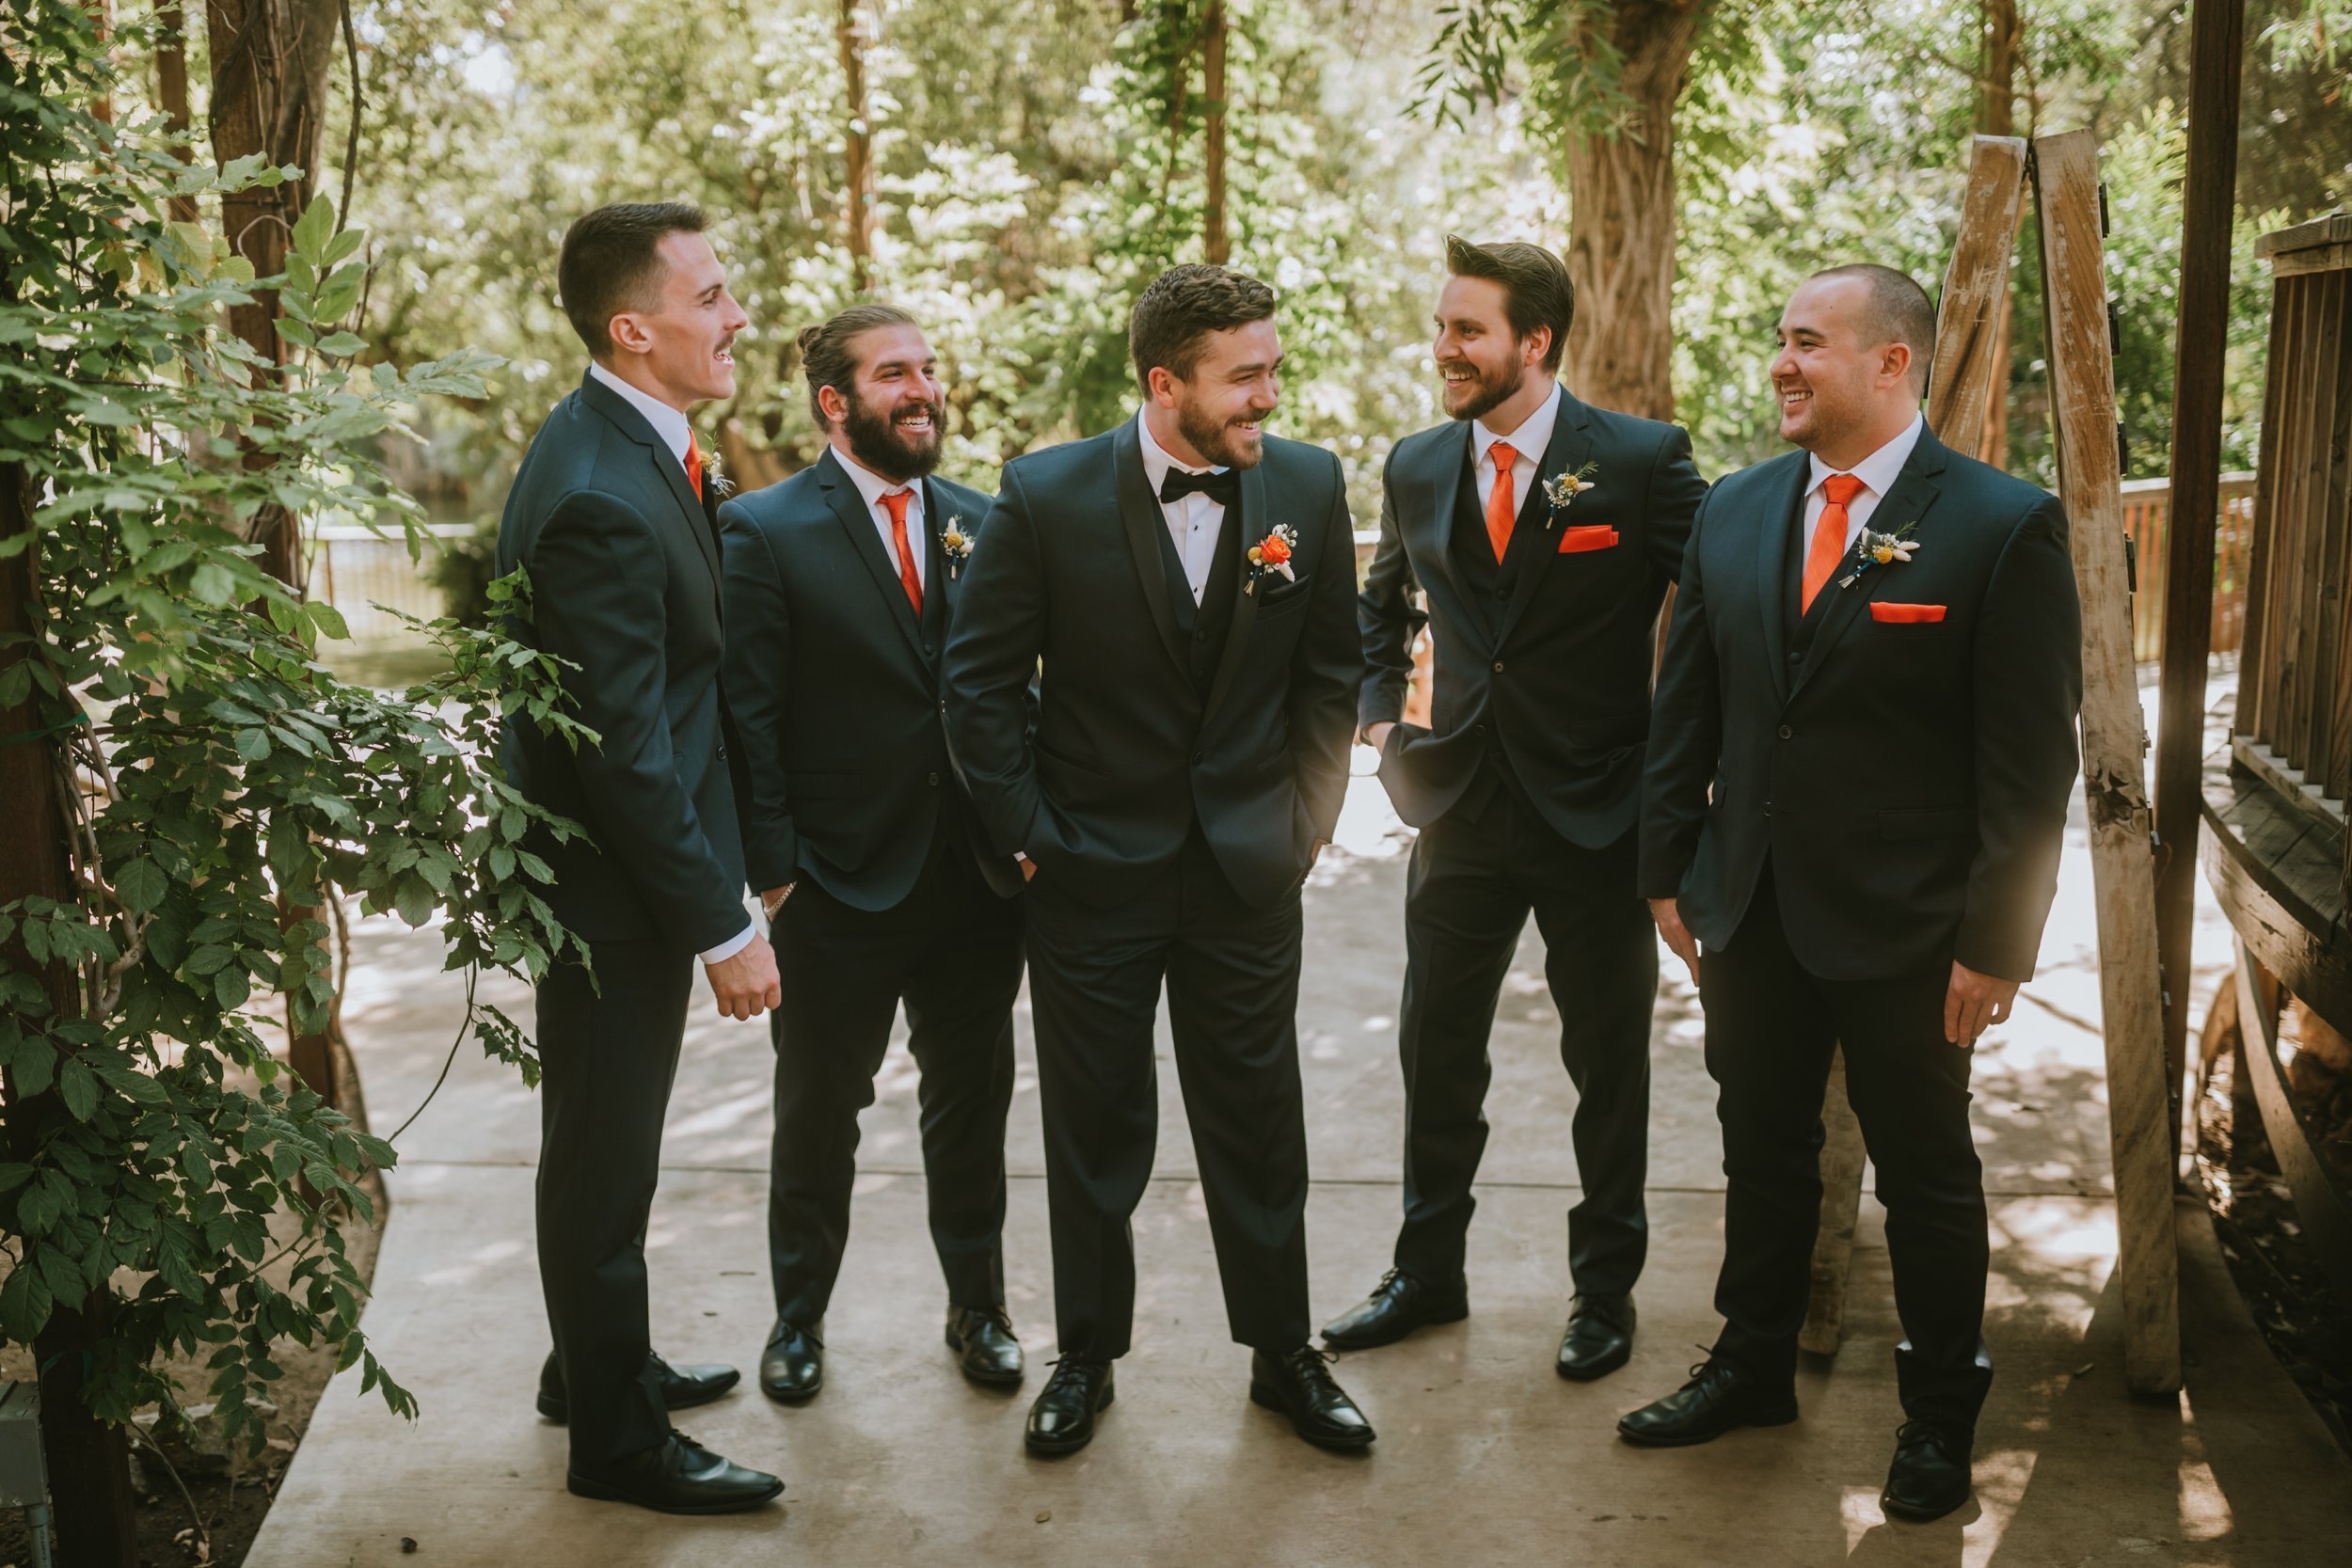 www.santabarbarawedding.com | Calamigos Ranch | Events by Fran | Yanira Scalise | Friar Tux | The Exotic Green Garden | The Groom with His Groomsmen